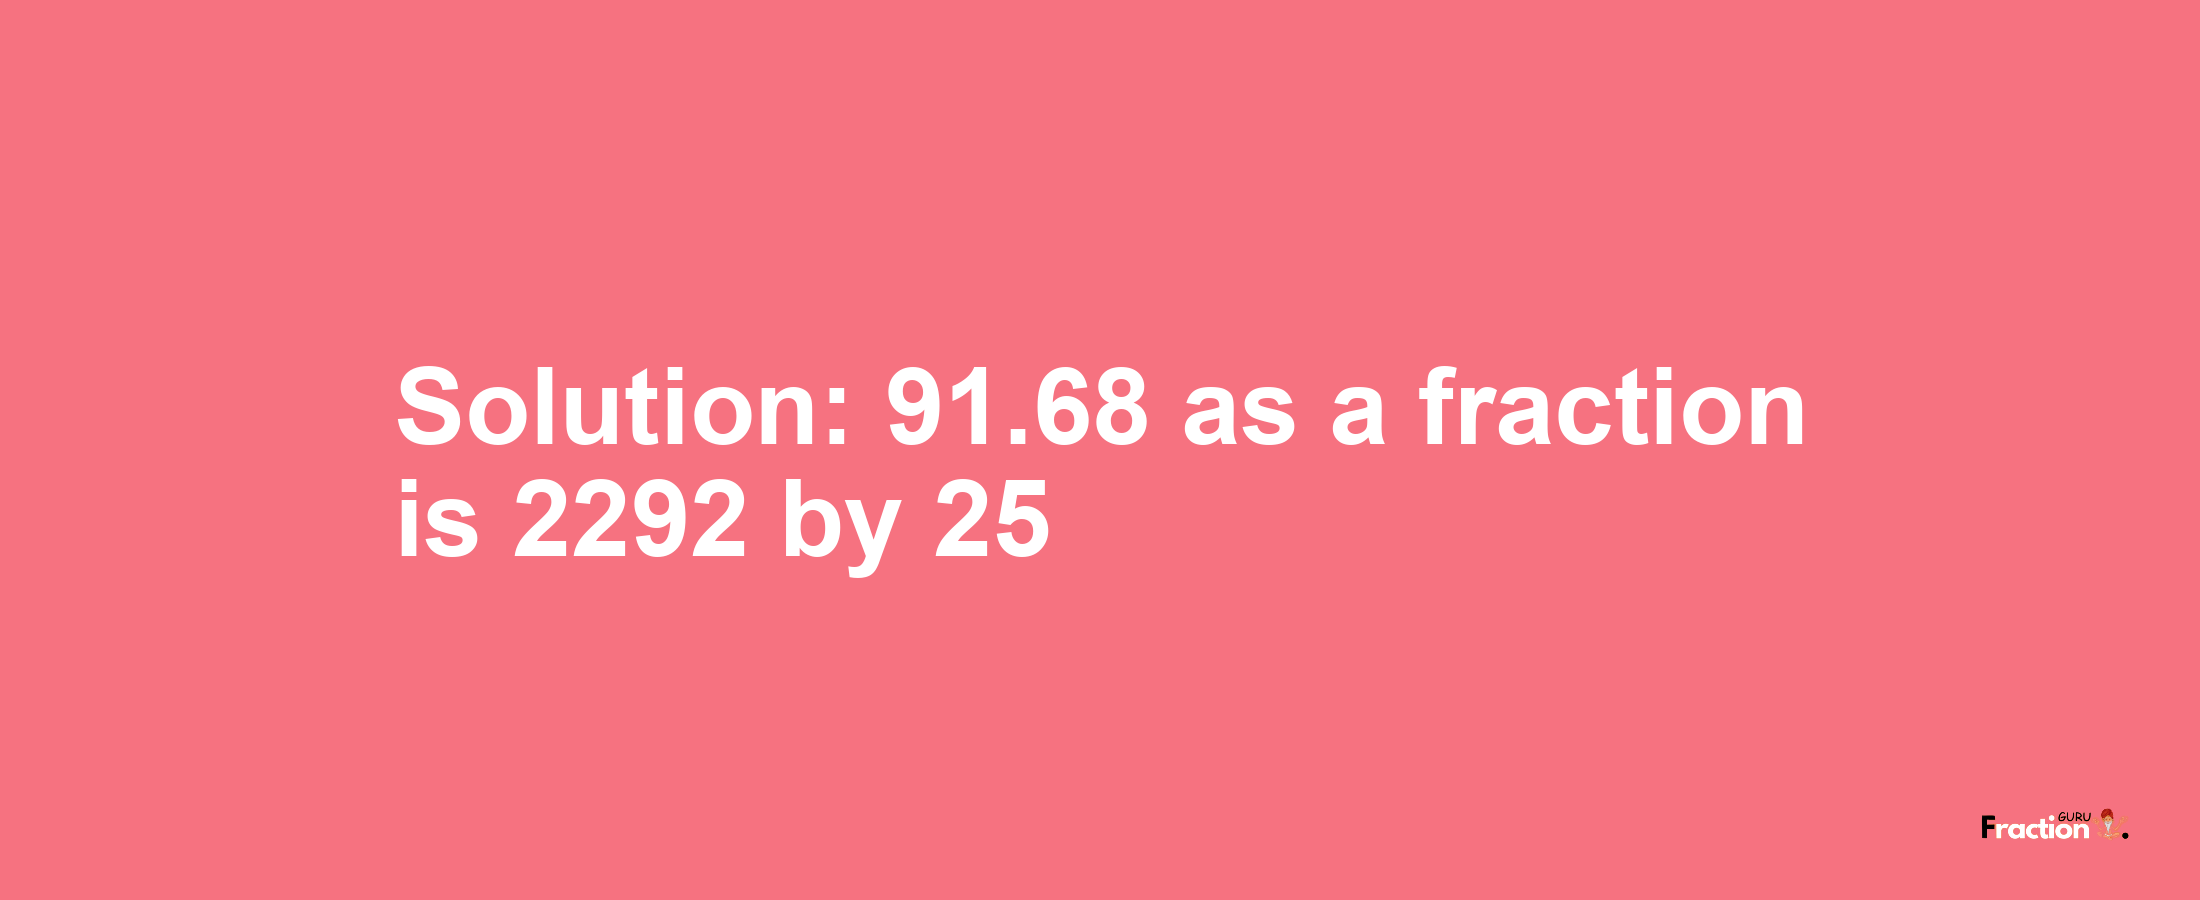 Solution:91.68 as a fraction is 2292/25